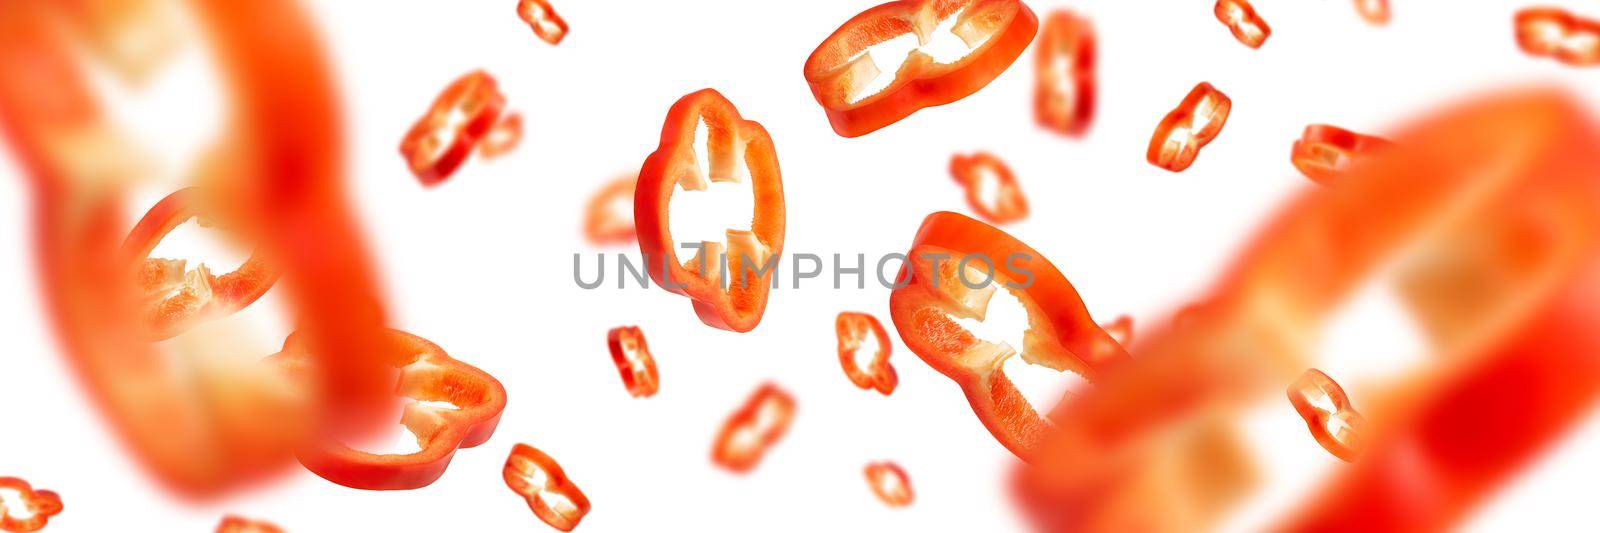 Red bell pepper cut into slices isolated on white background. Falling pepper slices in different sizes and with different directions